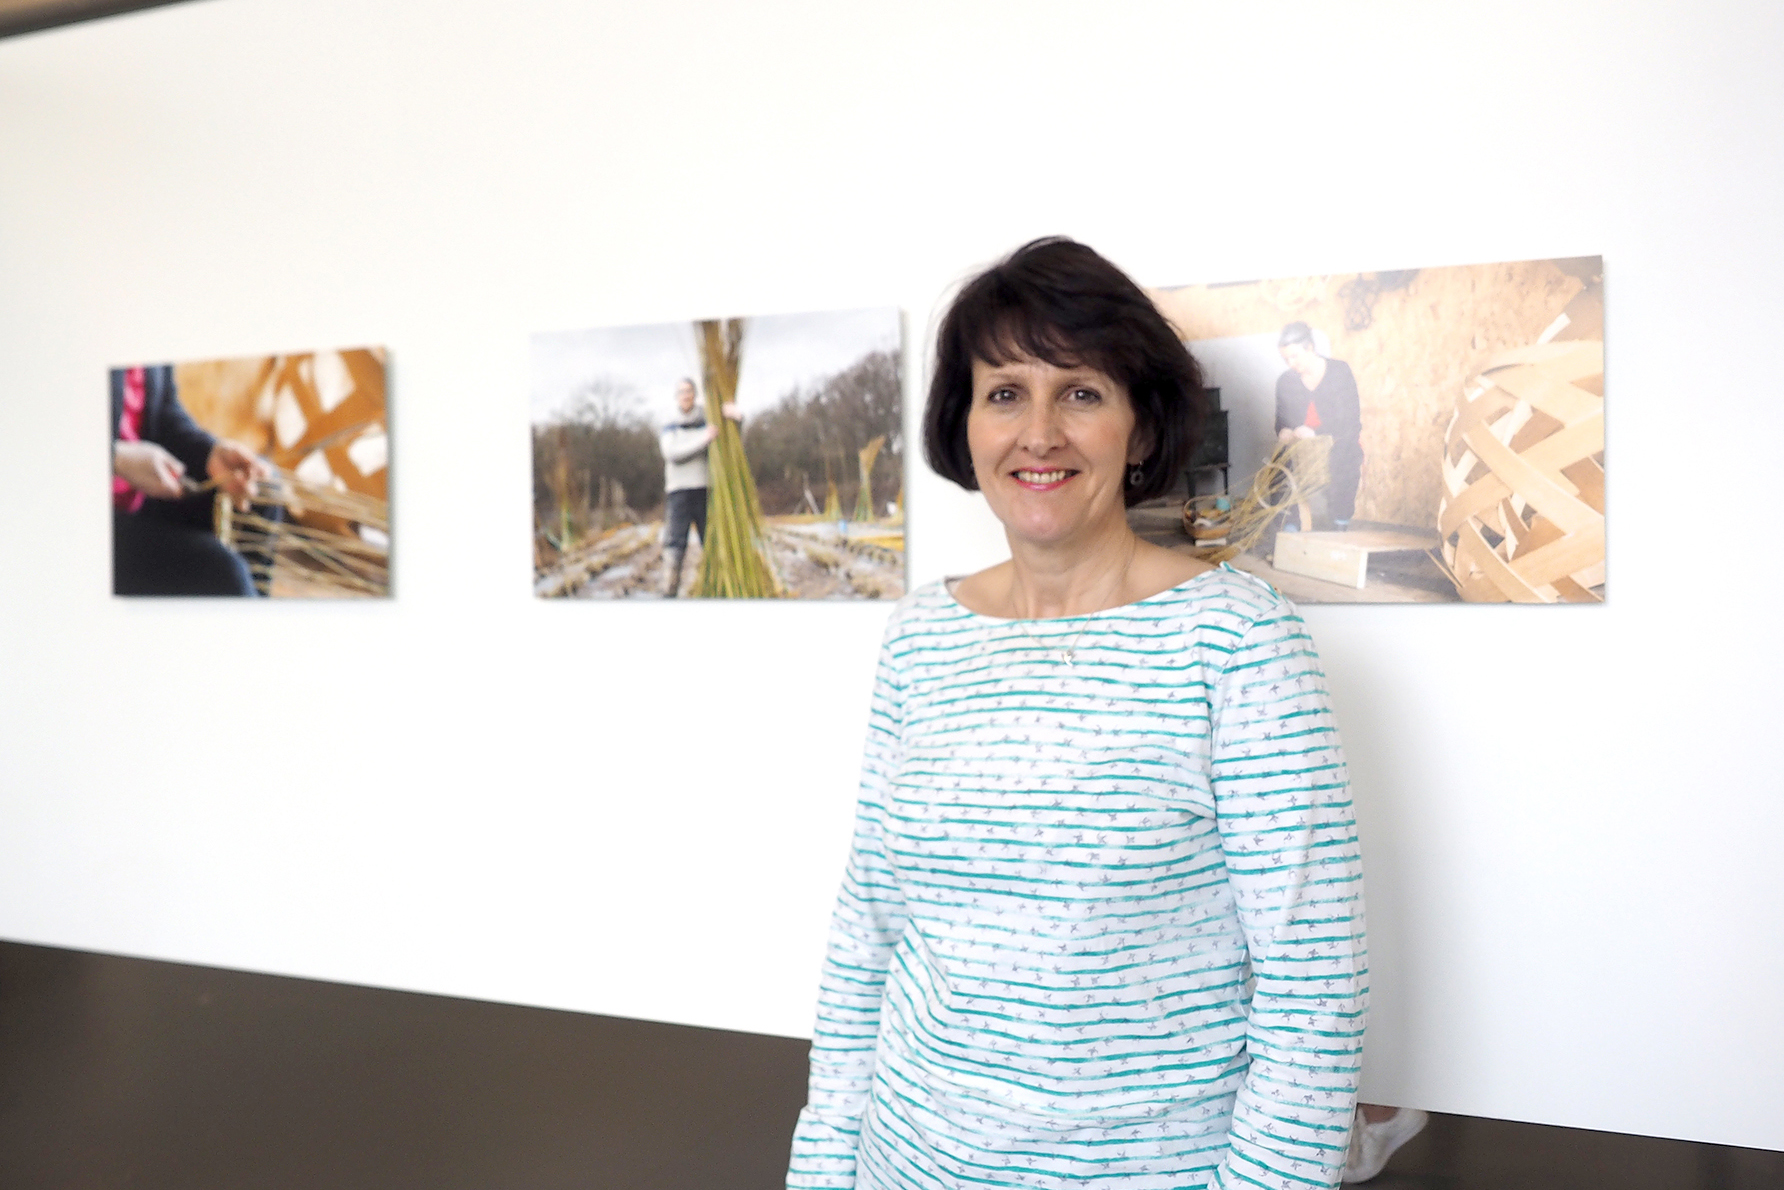 Anne Barratt with some of her photos.